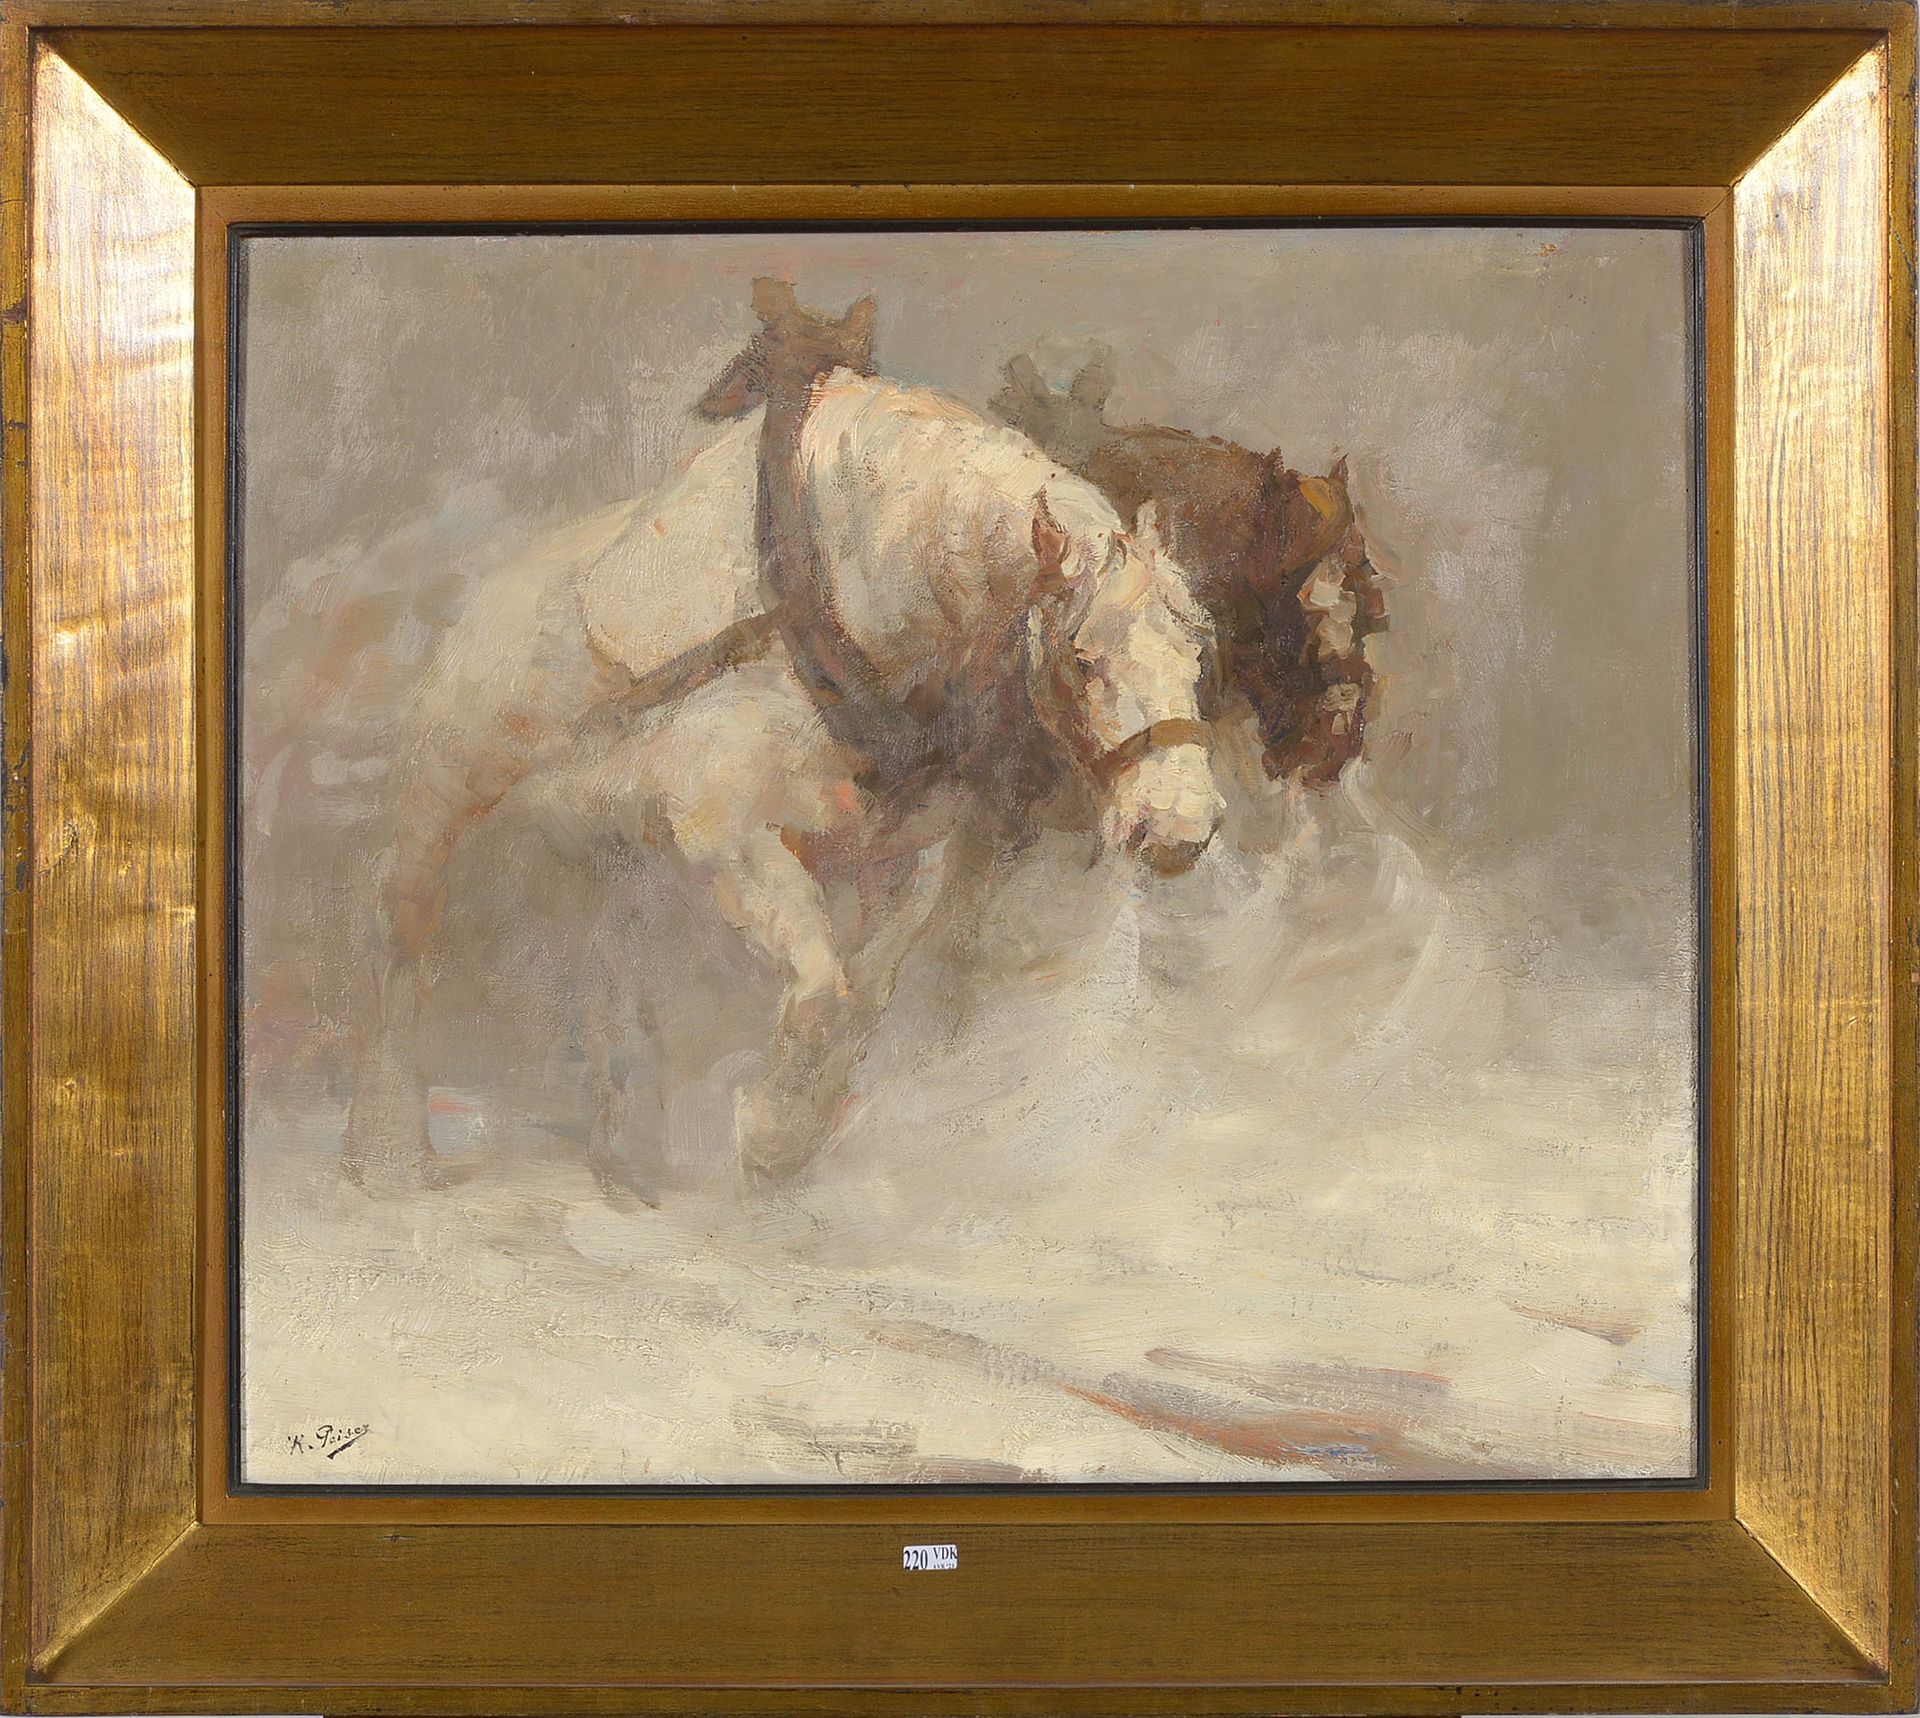 PEISER Kurt (1887 - 1962) Oil on canvas "The carriage of draft horses in the sno&hellip;